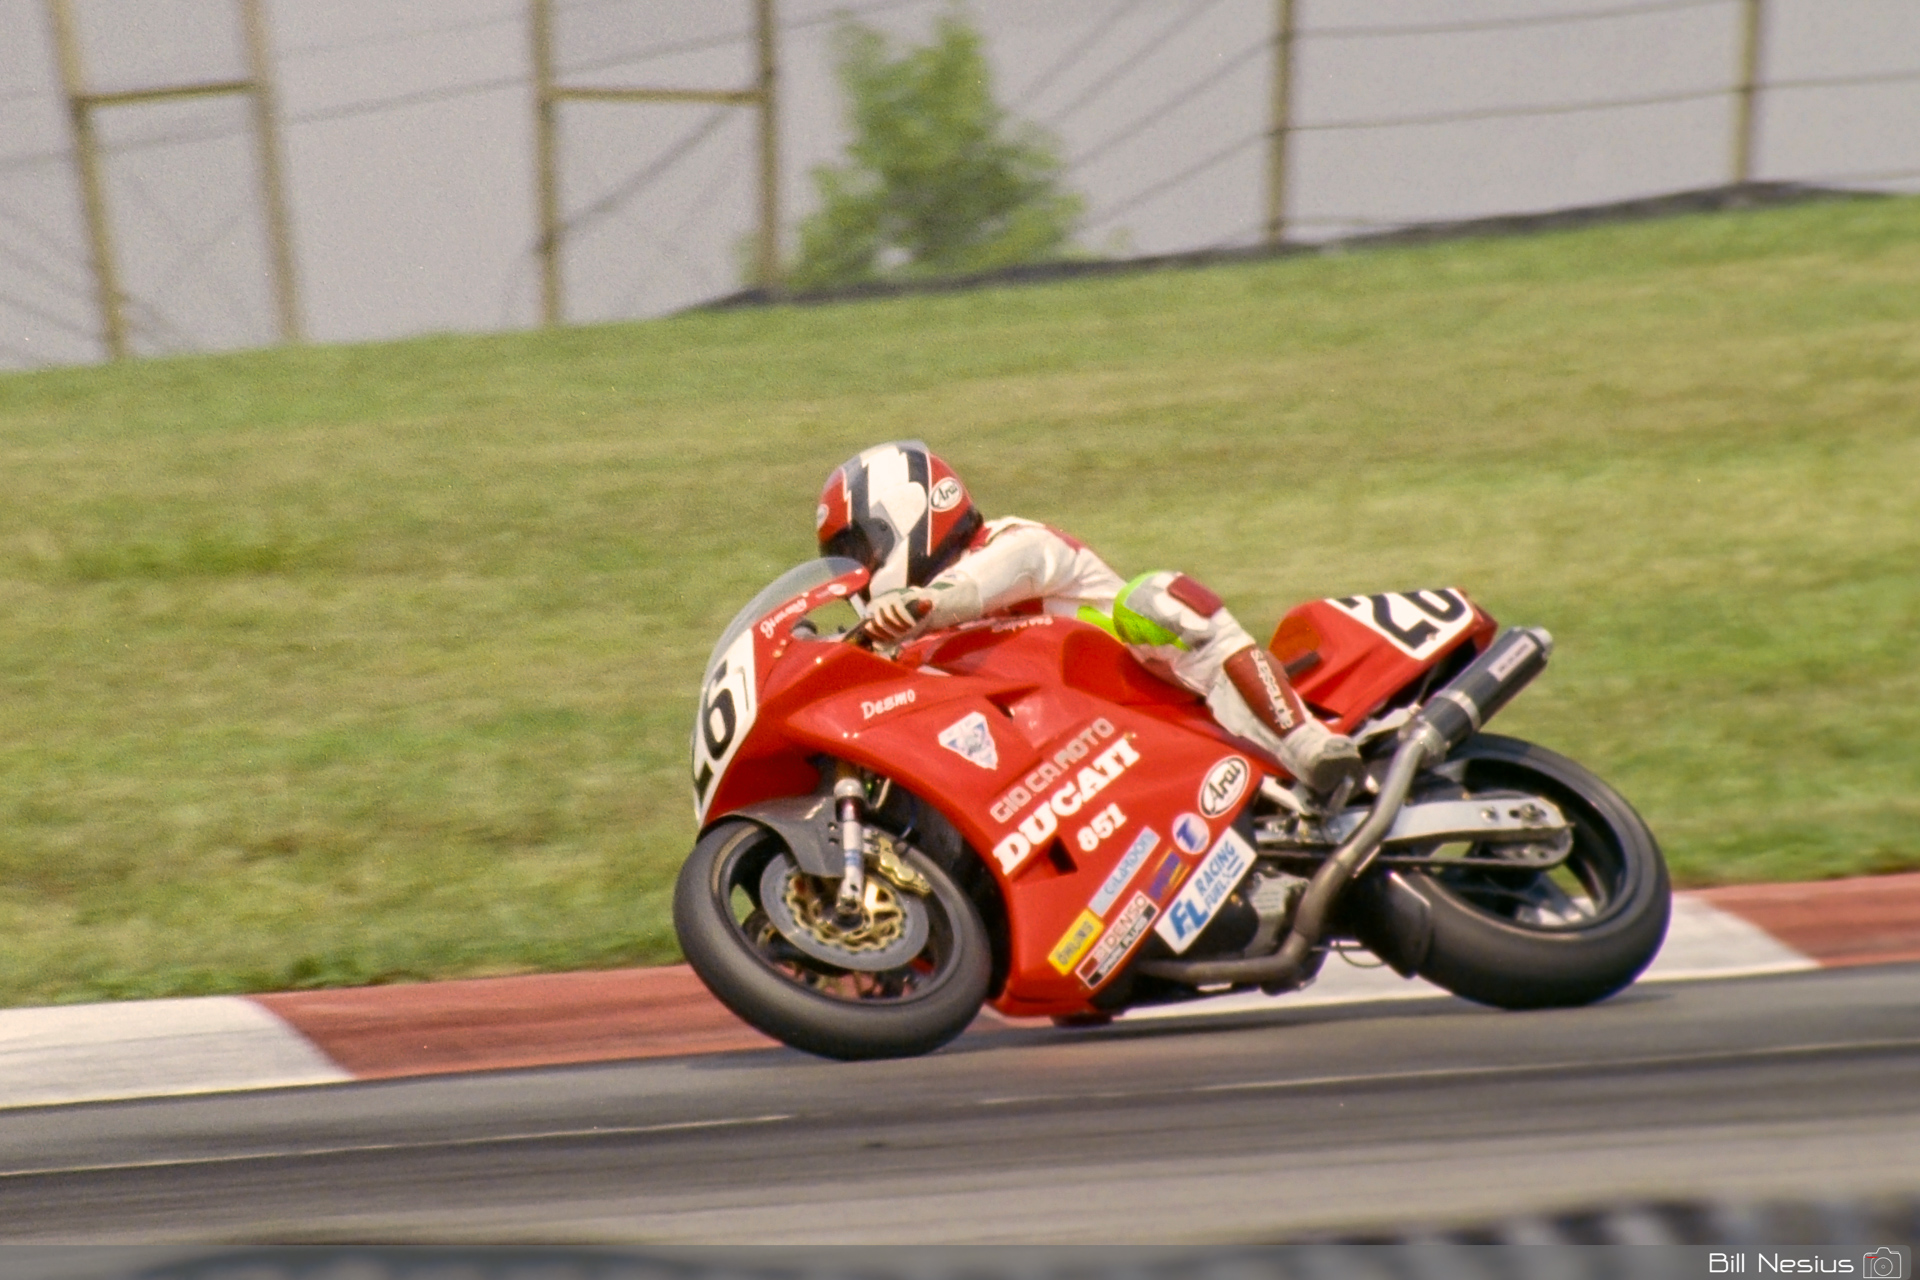 Jimmy Adamo on a the Number 26 Ducati 851 / FLM_7765 / 2